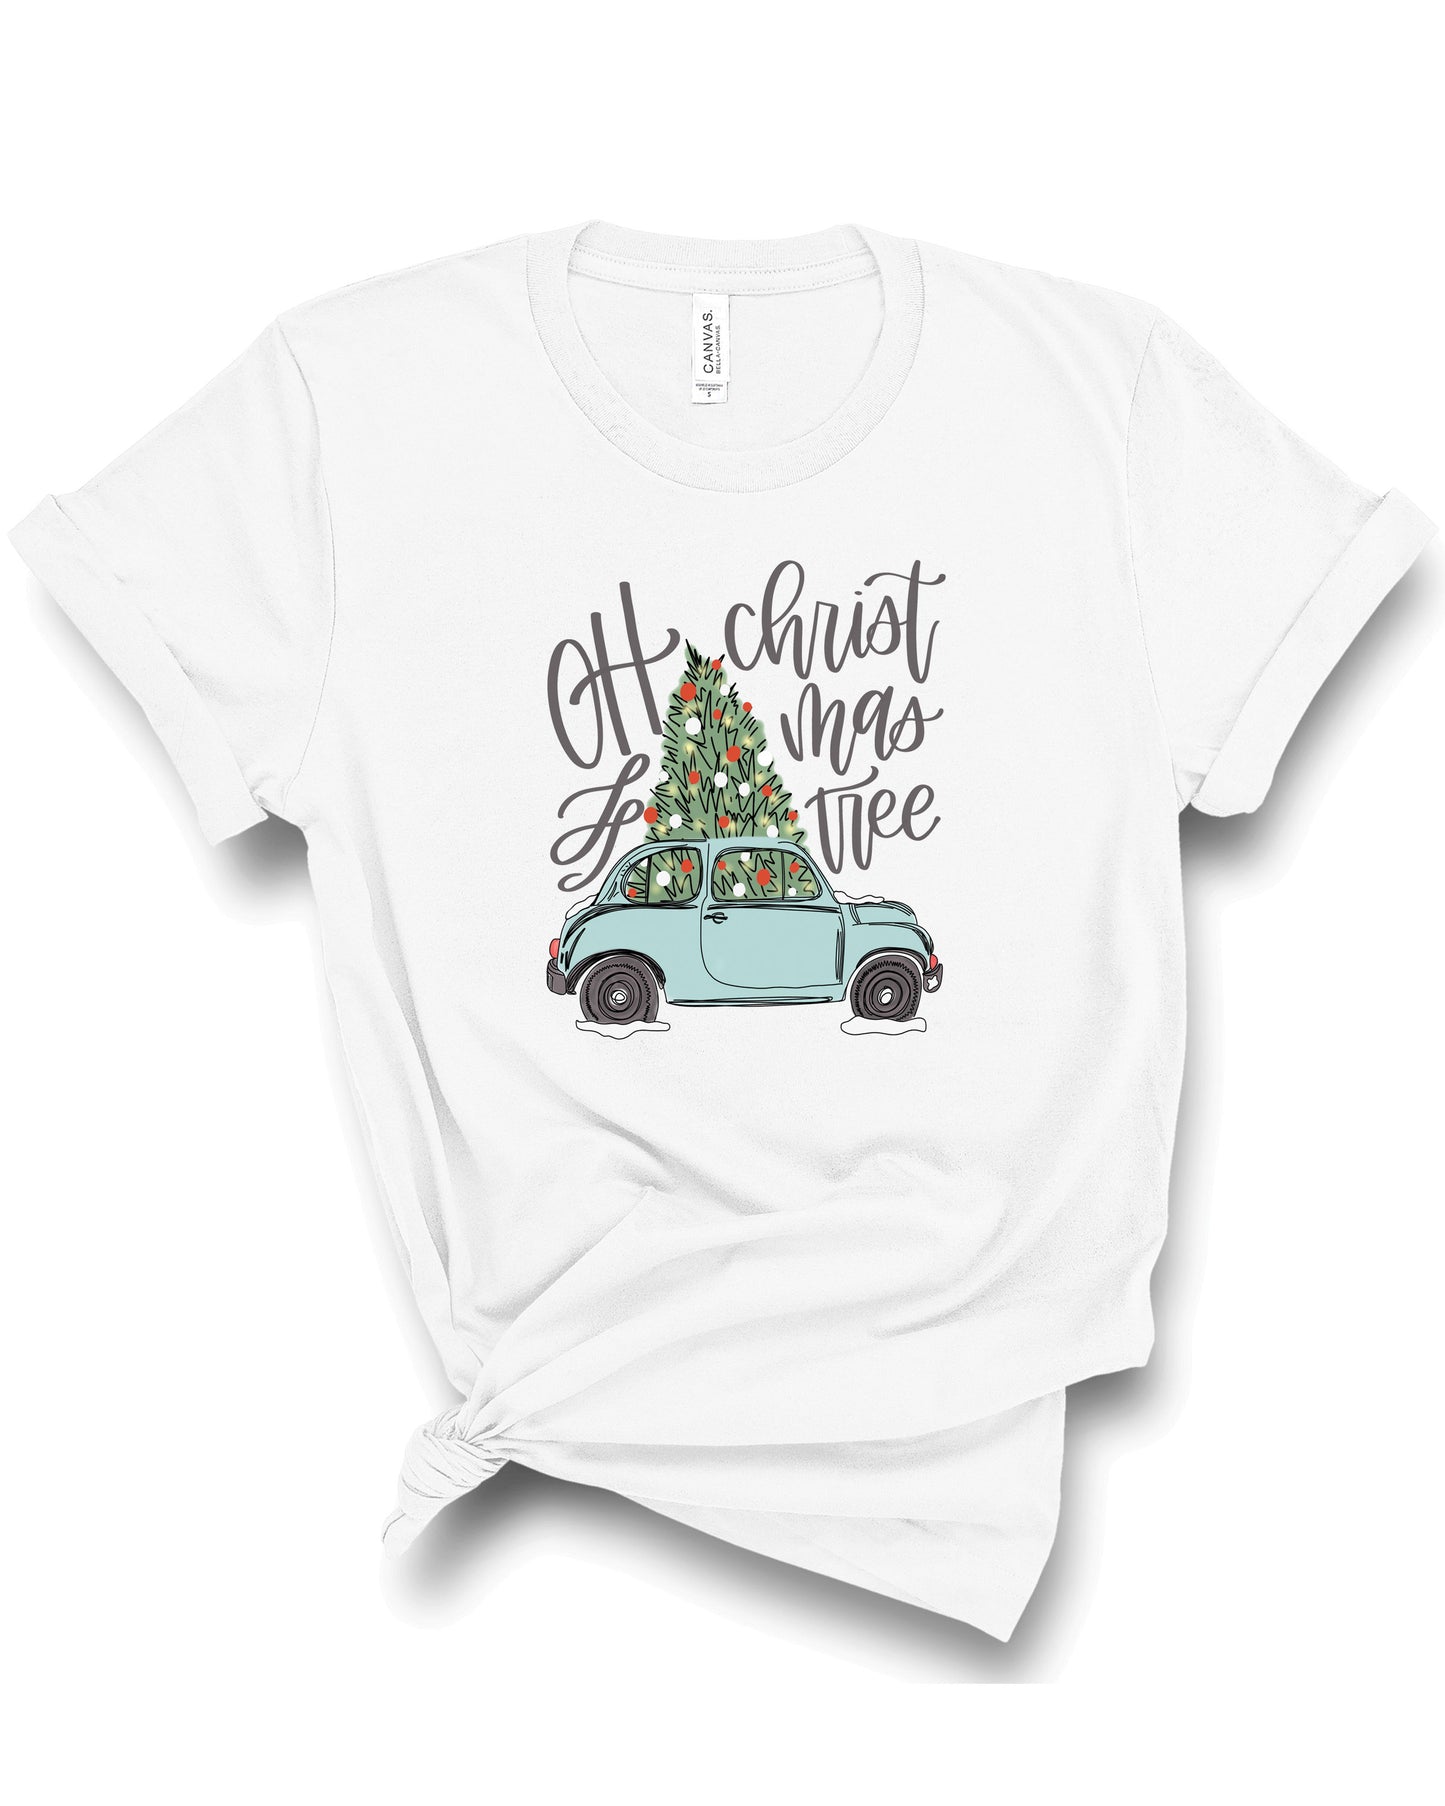 Oh Christmas Tree | Adult Tee-Adult Tee-Sister Shirts-Sister Shirts, Cute & Custom Tees for Mama & Littles in Trussville, Alabama.